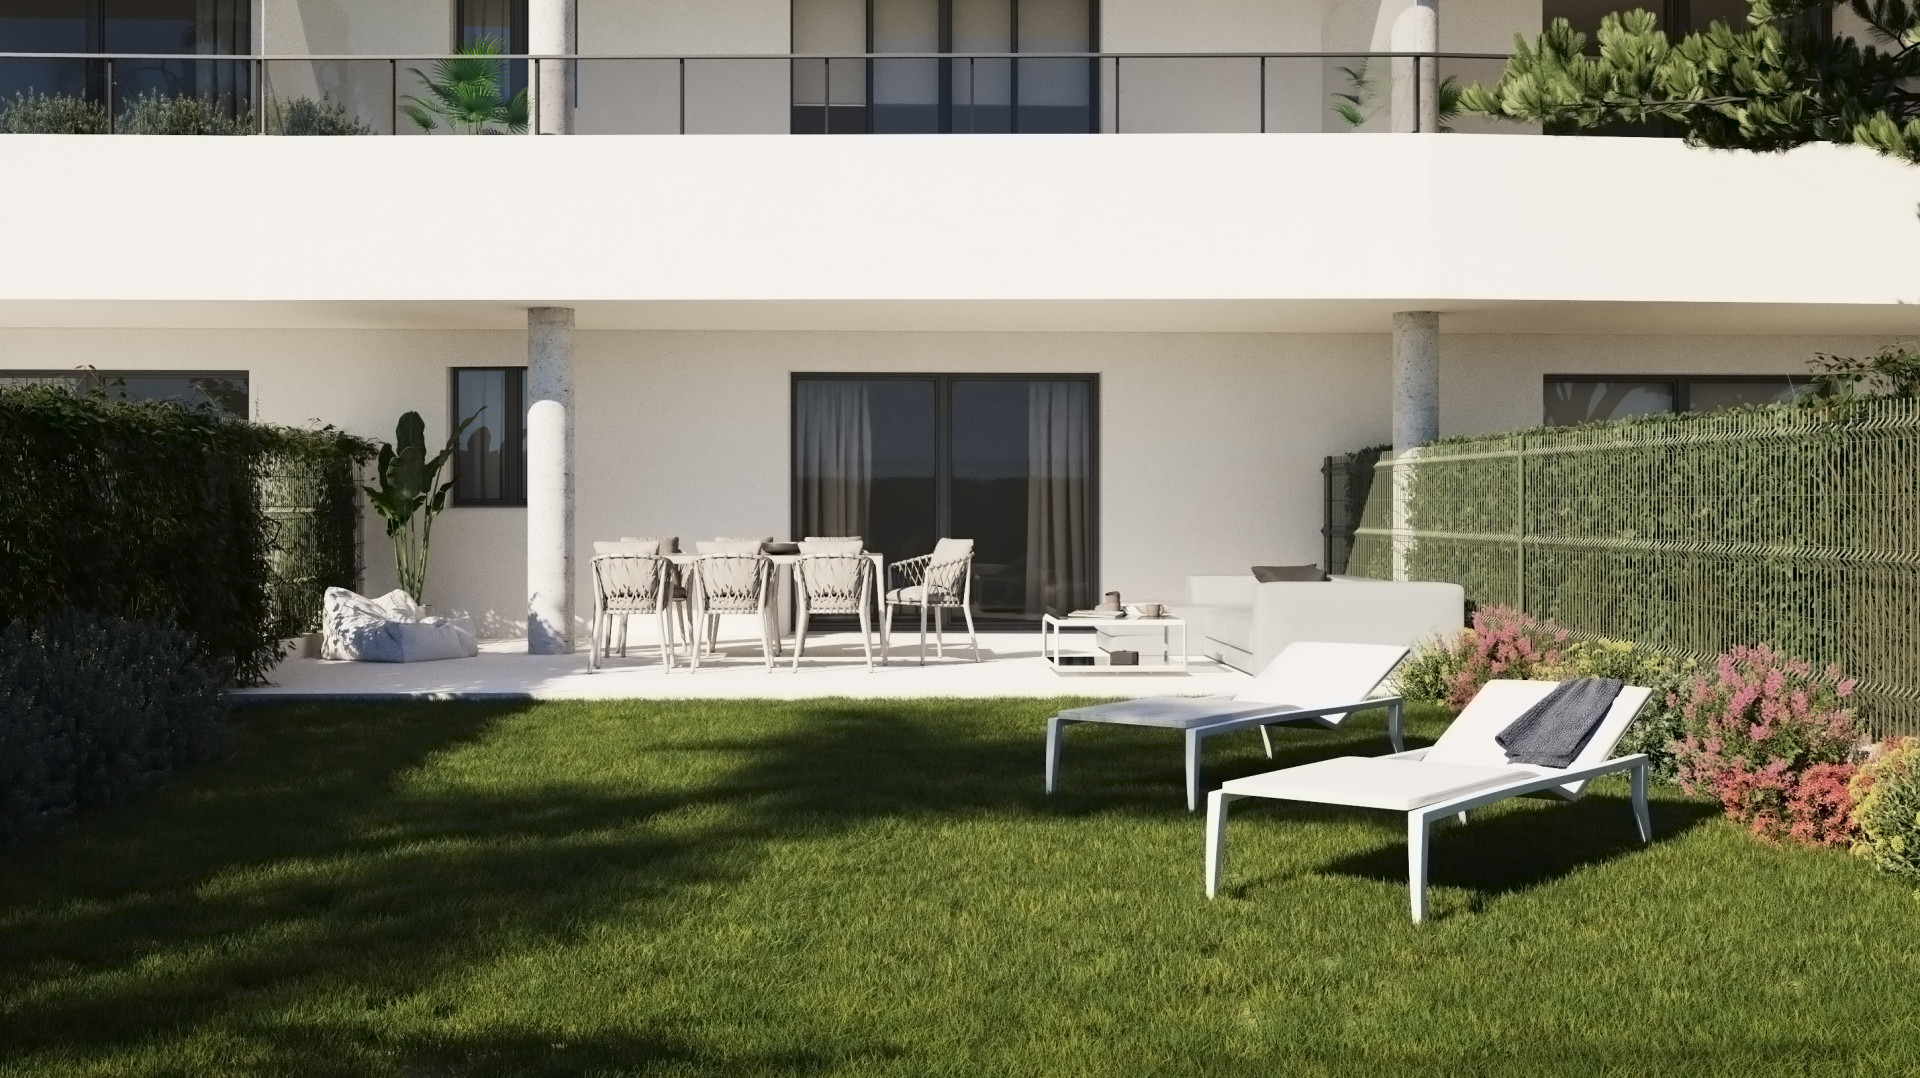 New modern apartments for sale on the New Golden Mile in Estepona